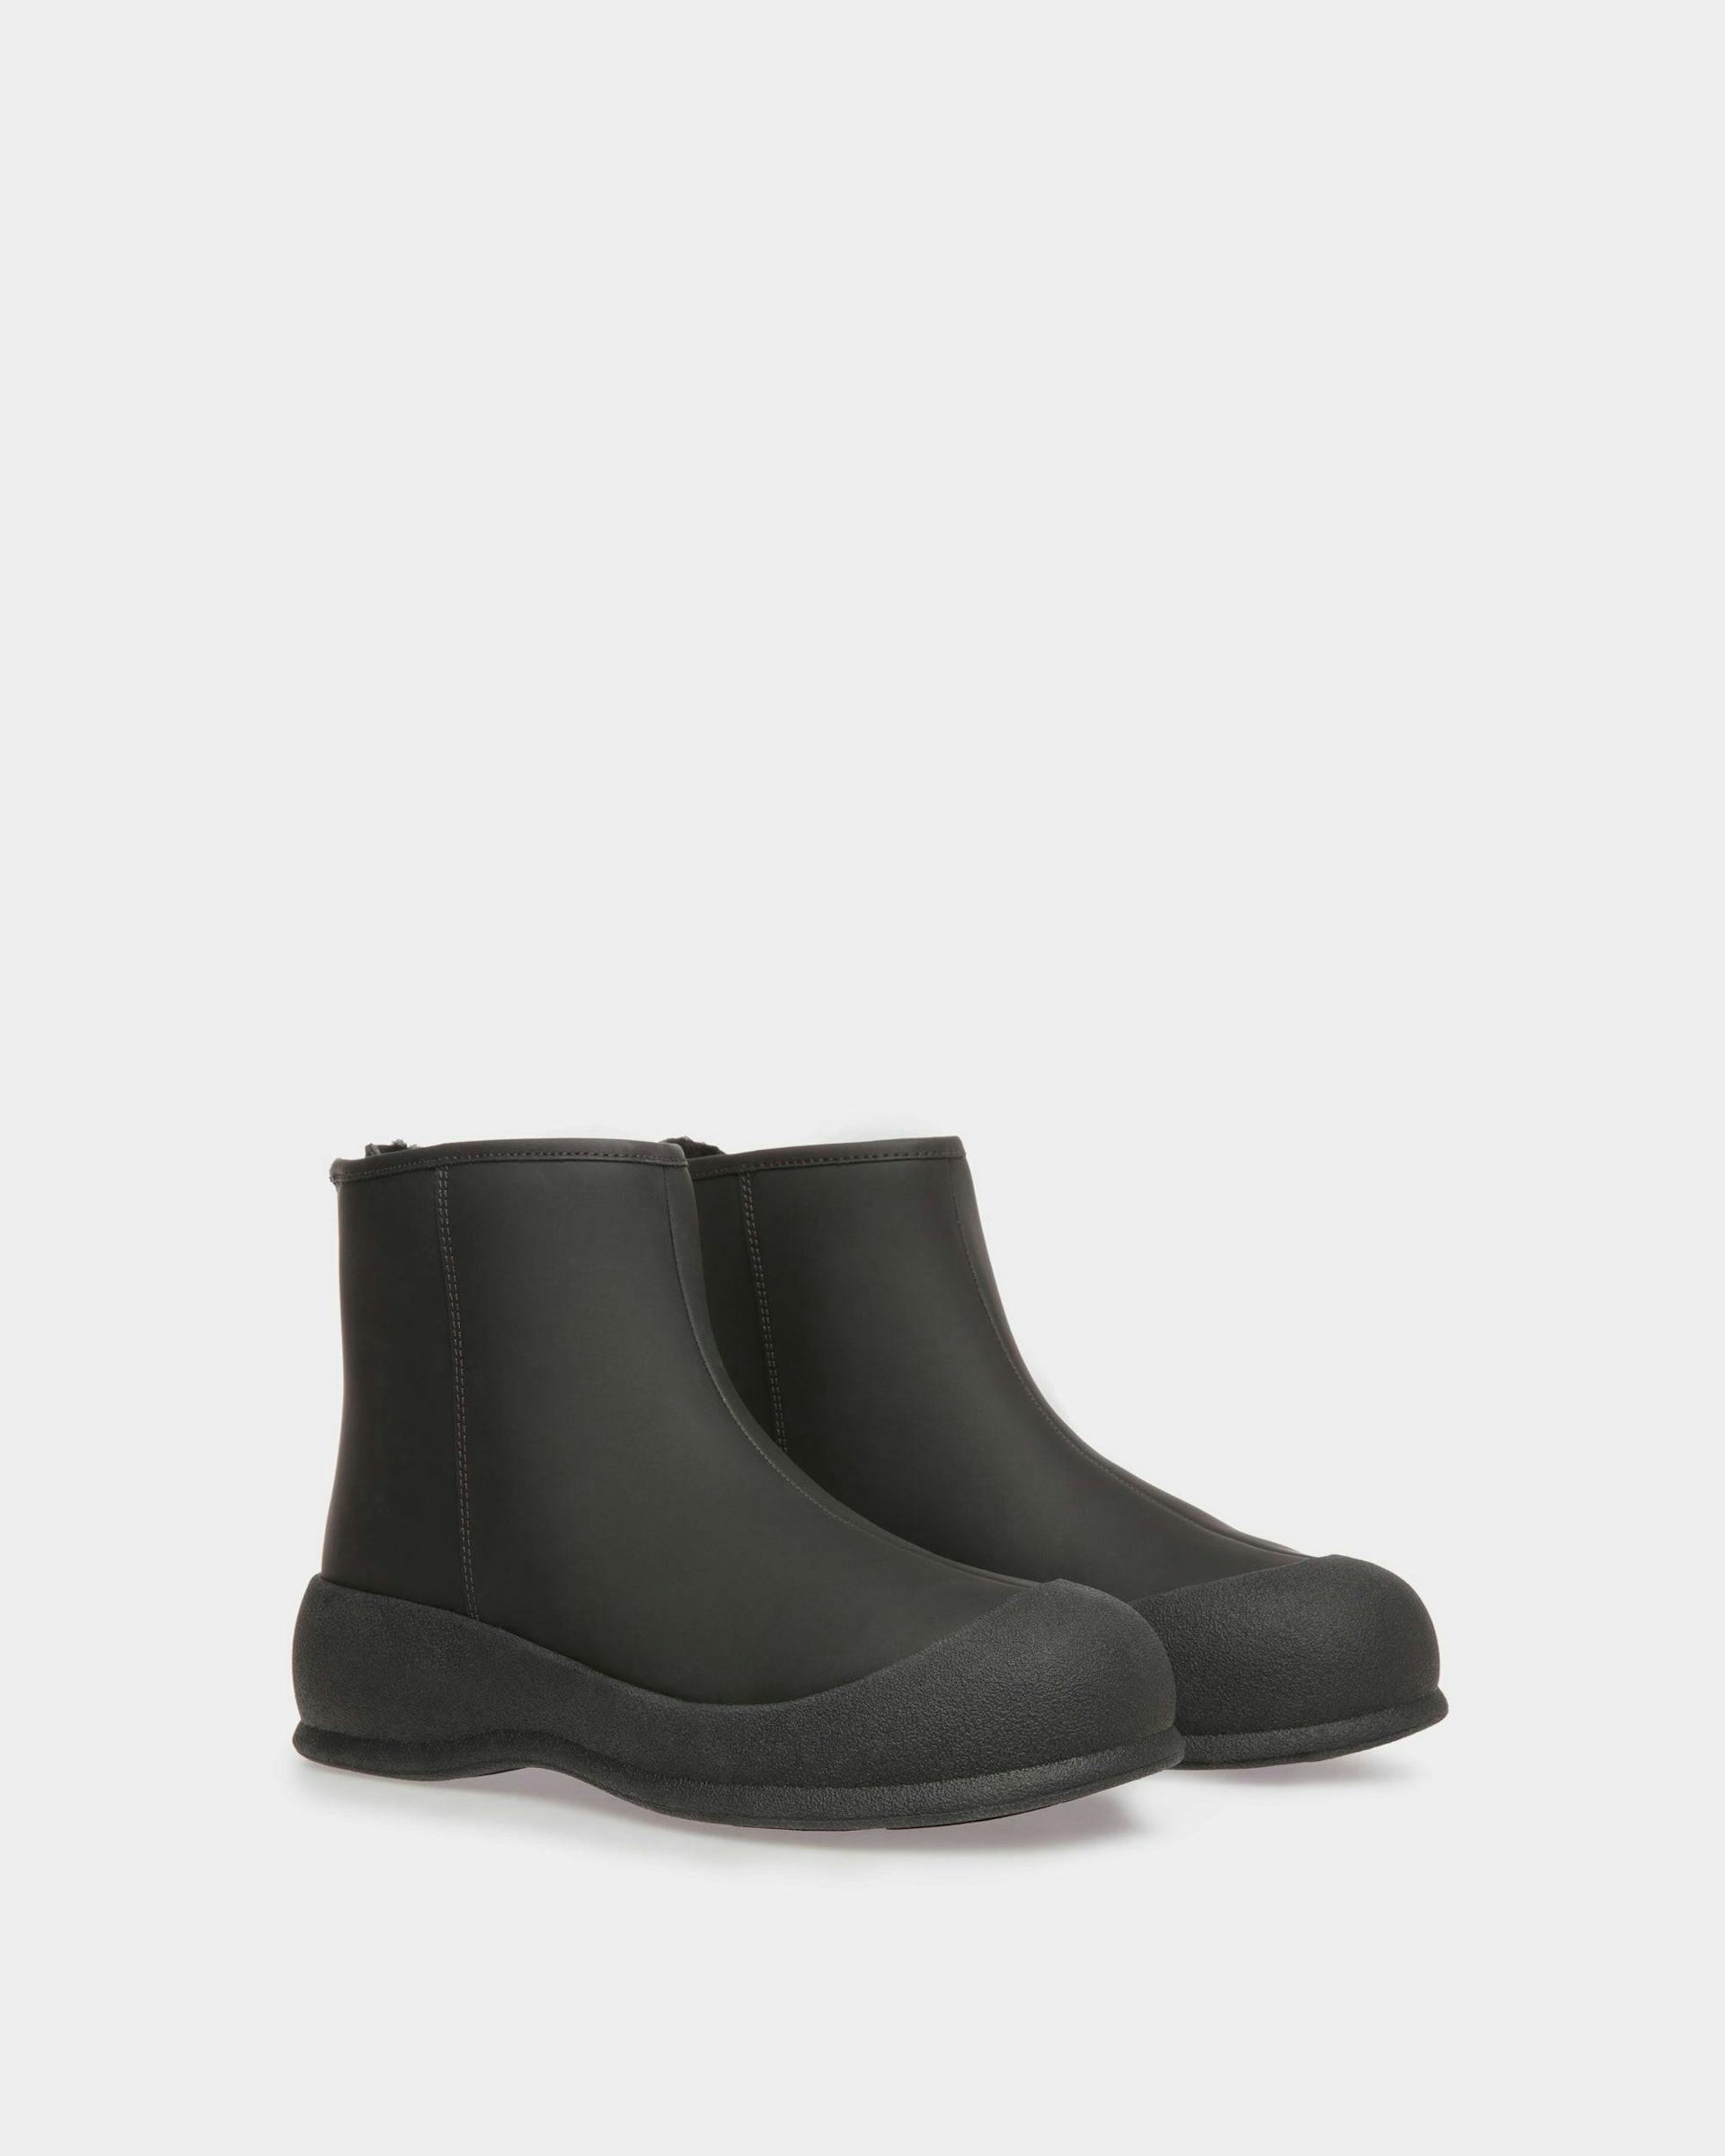 Women's Frei Snow Boots In Black Leather | Bally | Still Life 3/4 Front